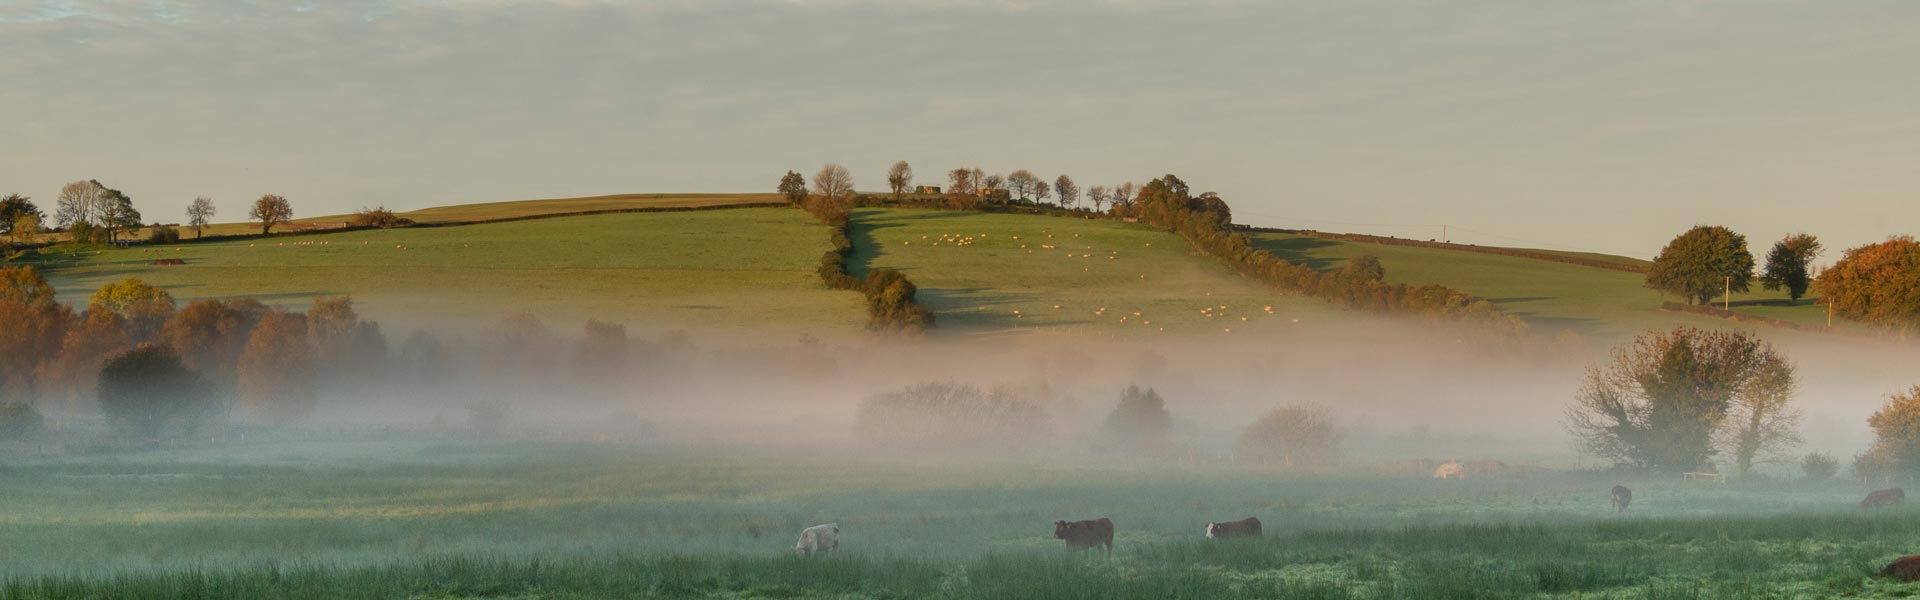 Cattle in a field with fog